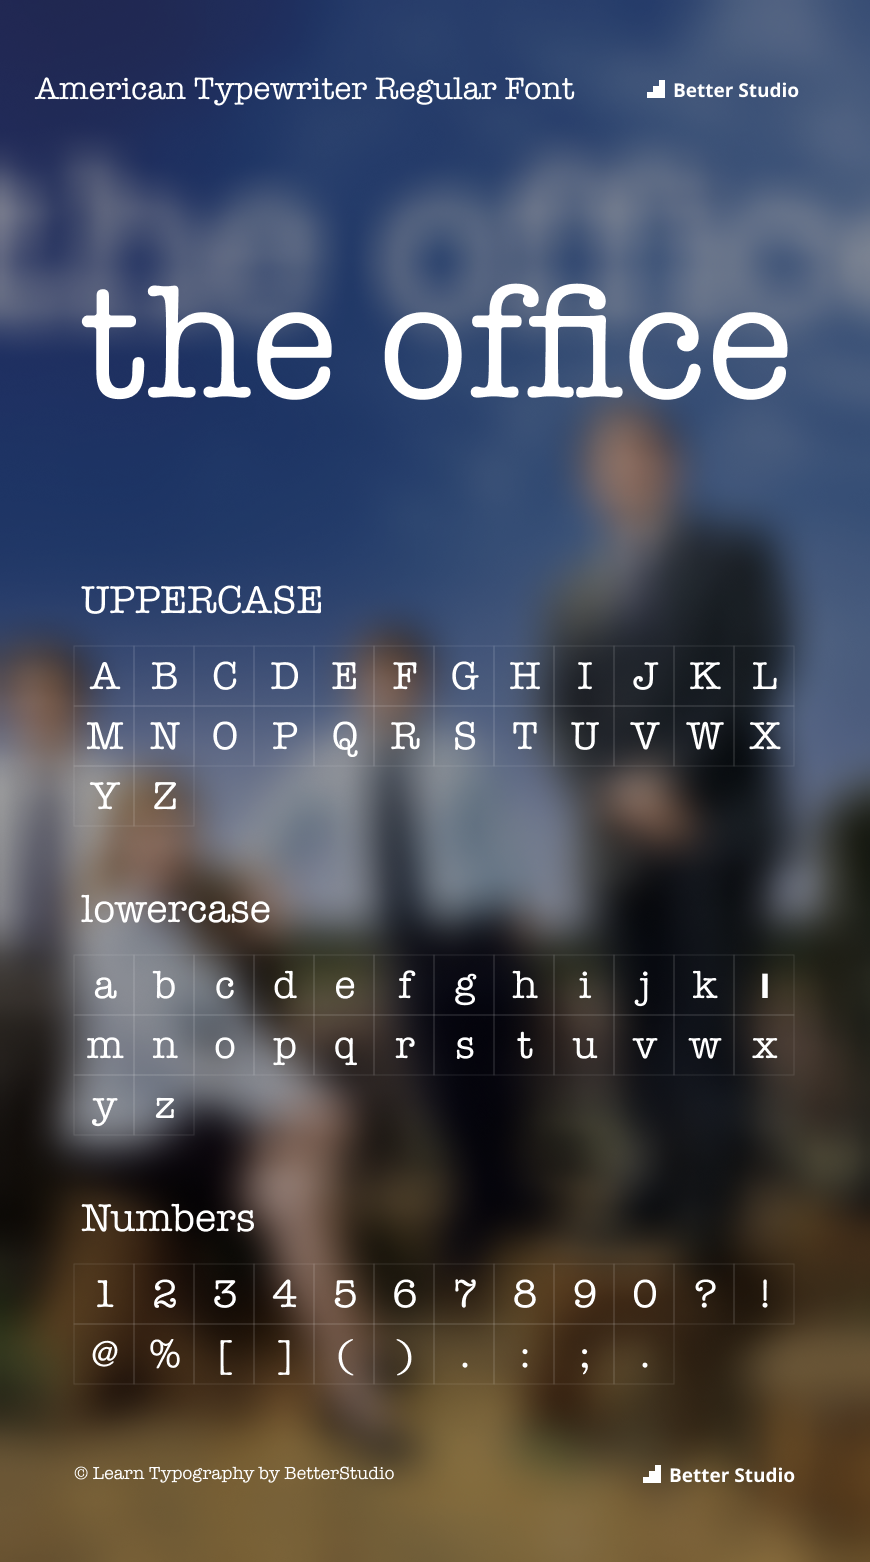 The Office Font: Download Free Font Now